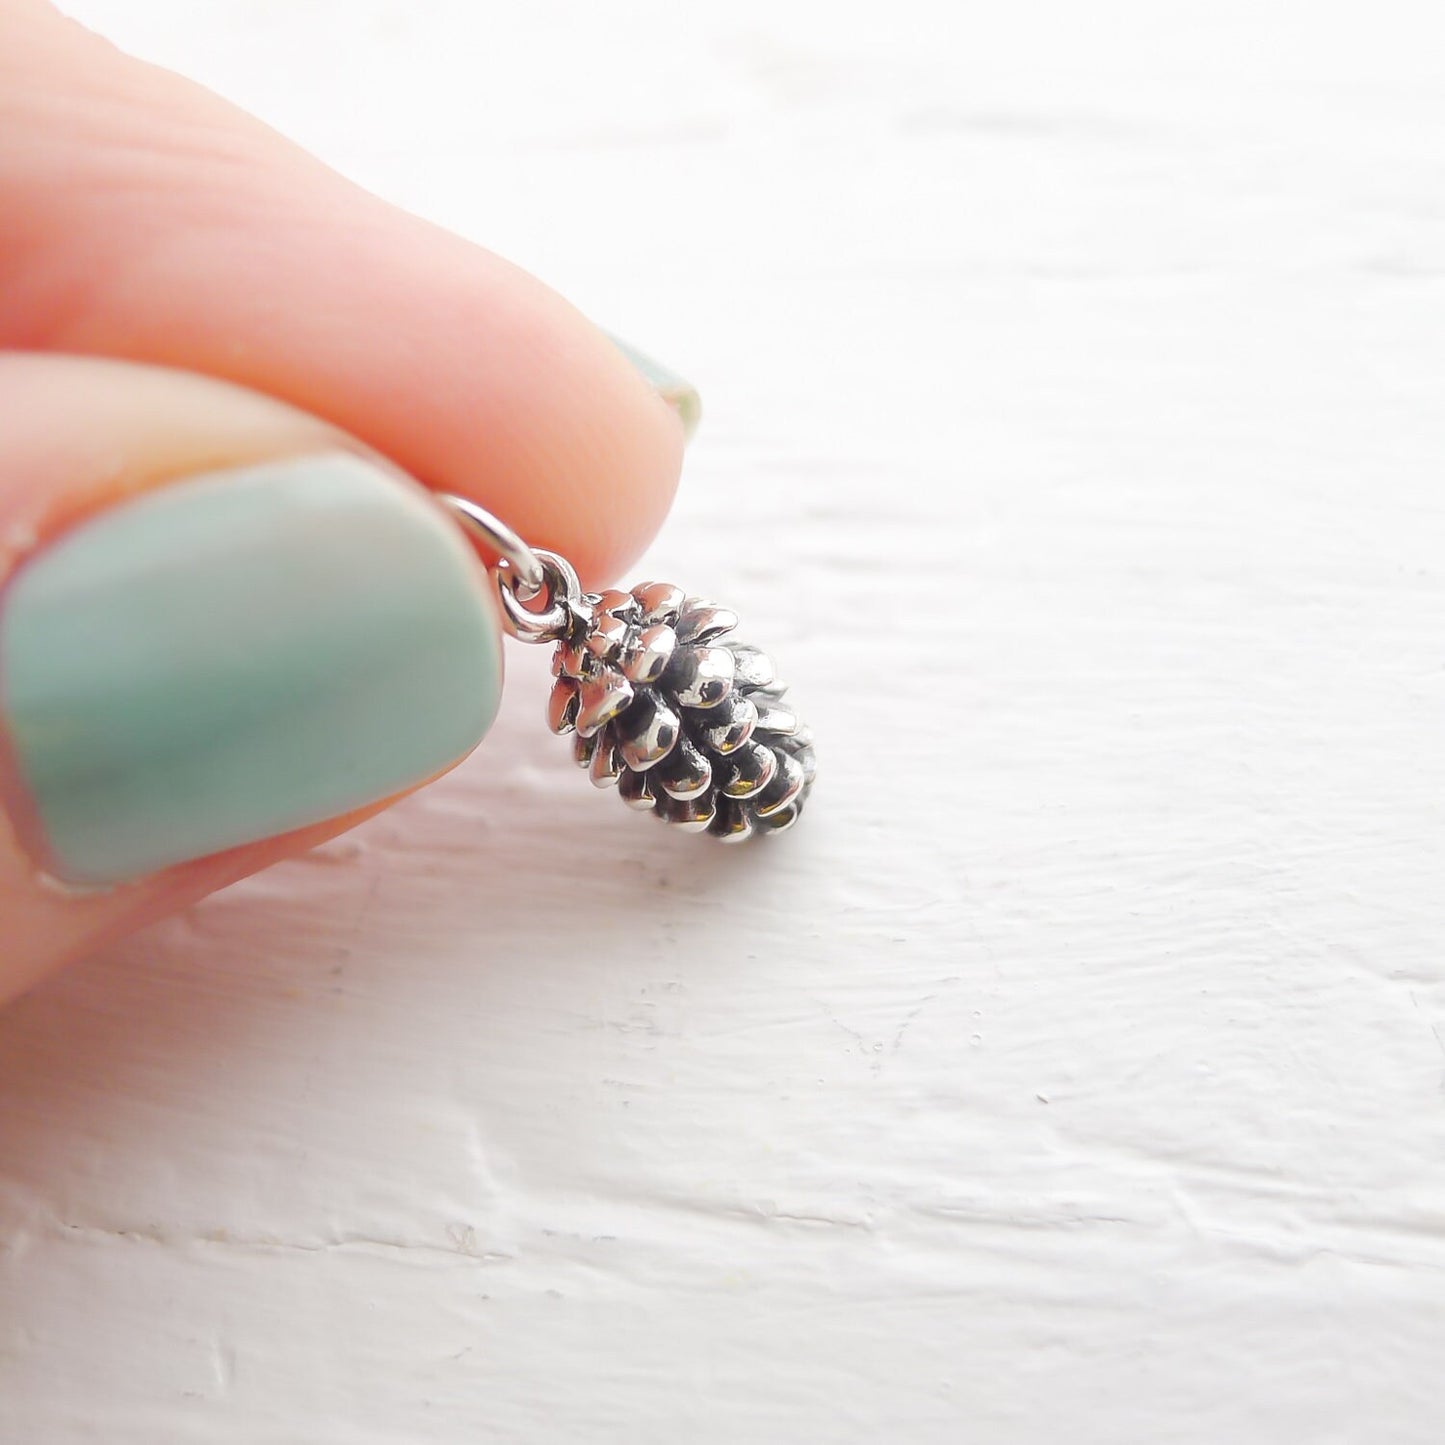 Pine cone Charm Pinecone Pendant Sterling Silver Jewelry Making